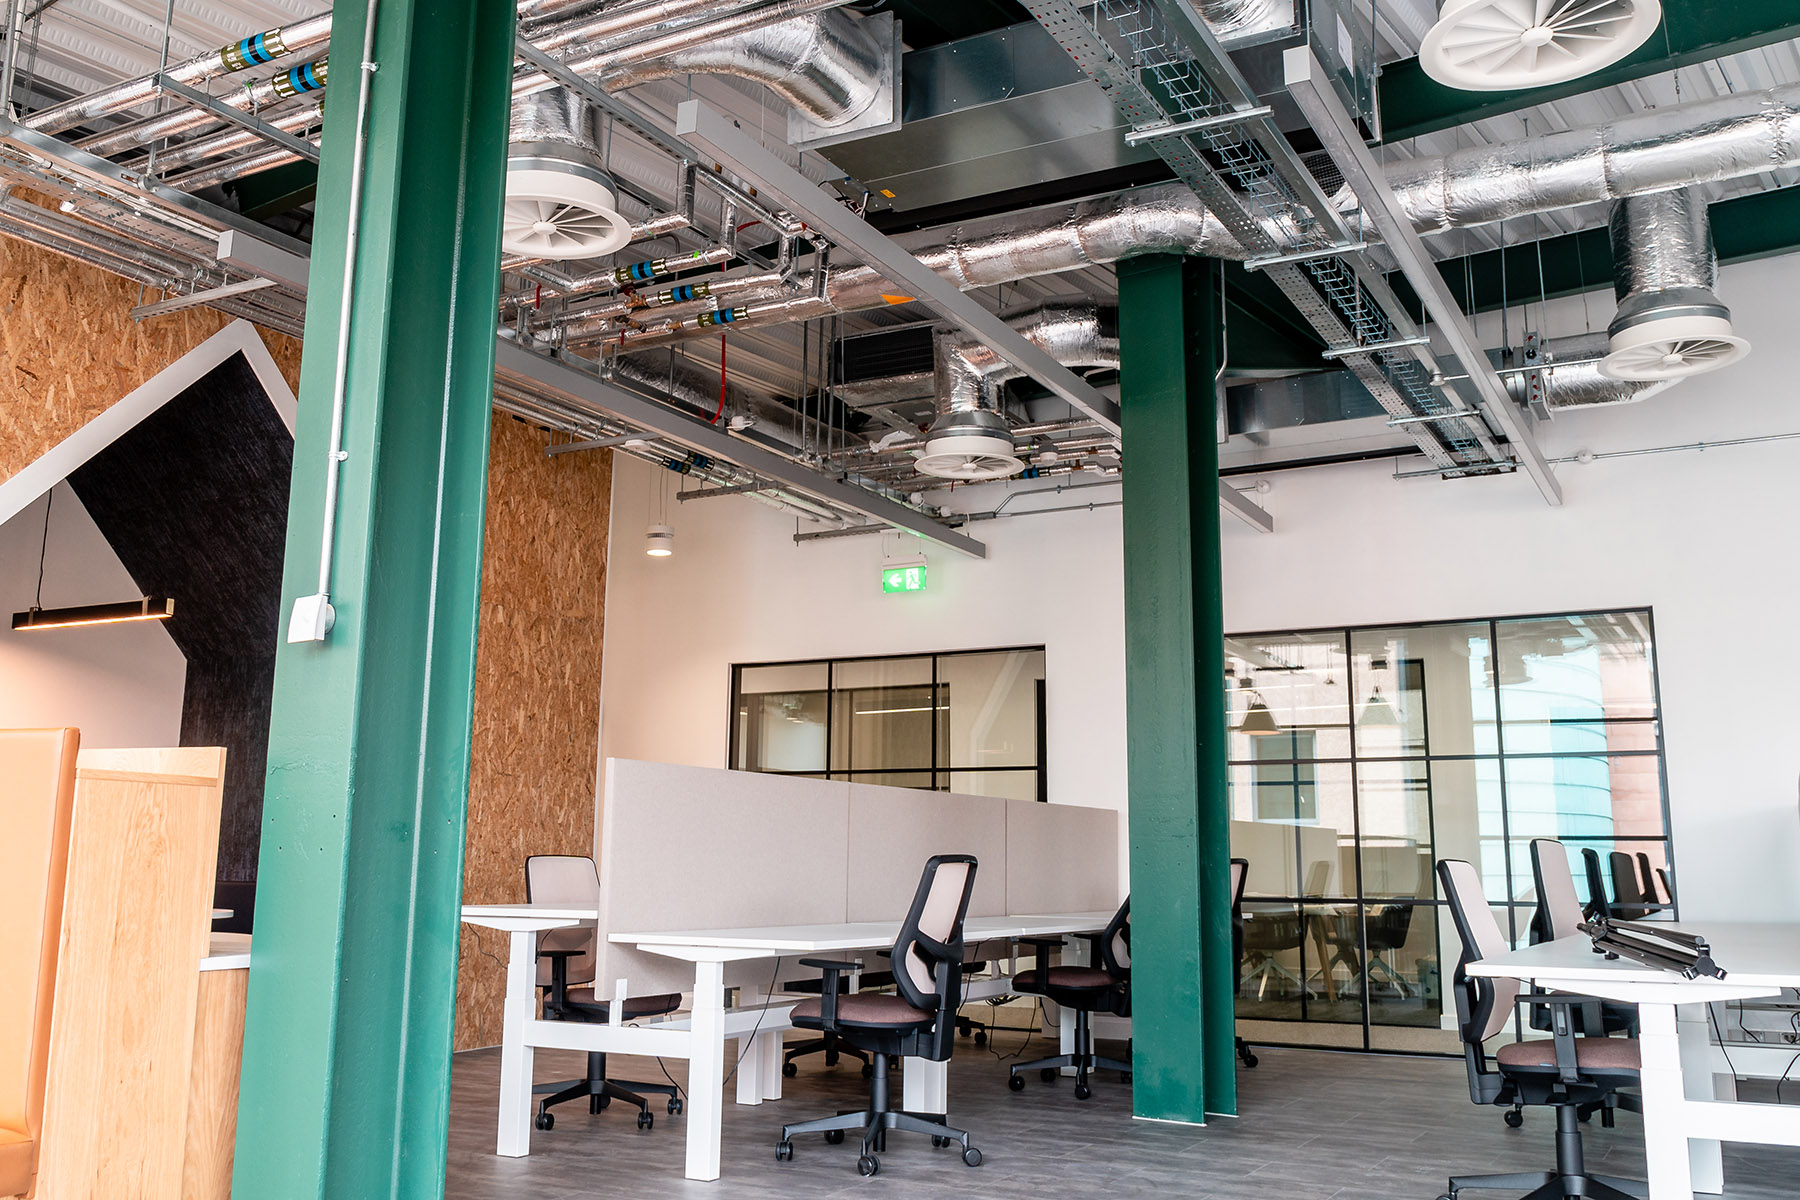 The Abertay cyberQuarter launch photos! Open plan office space with desks and chairs  #10